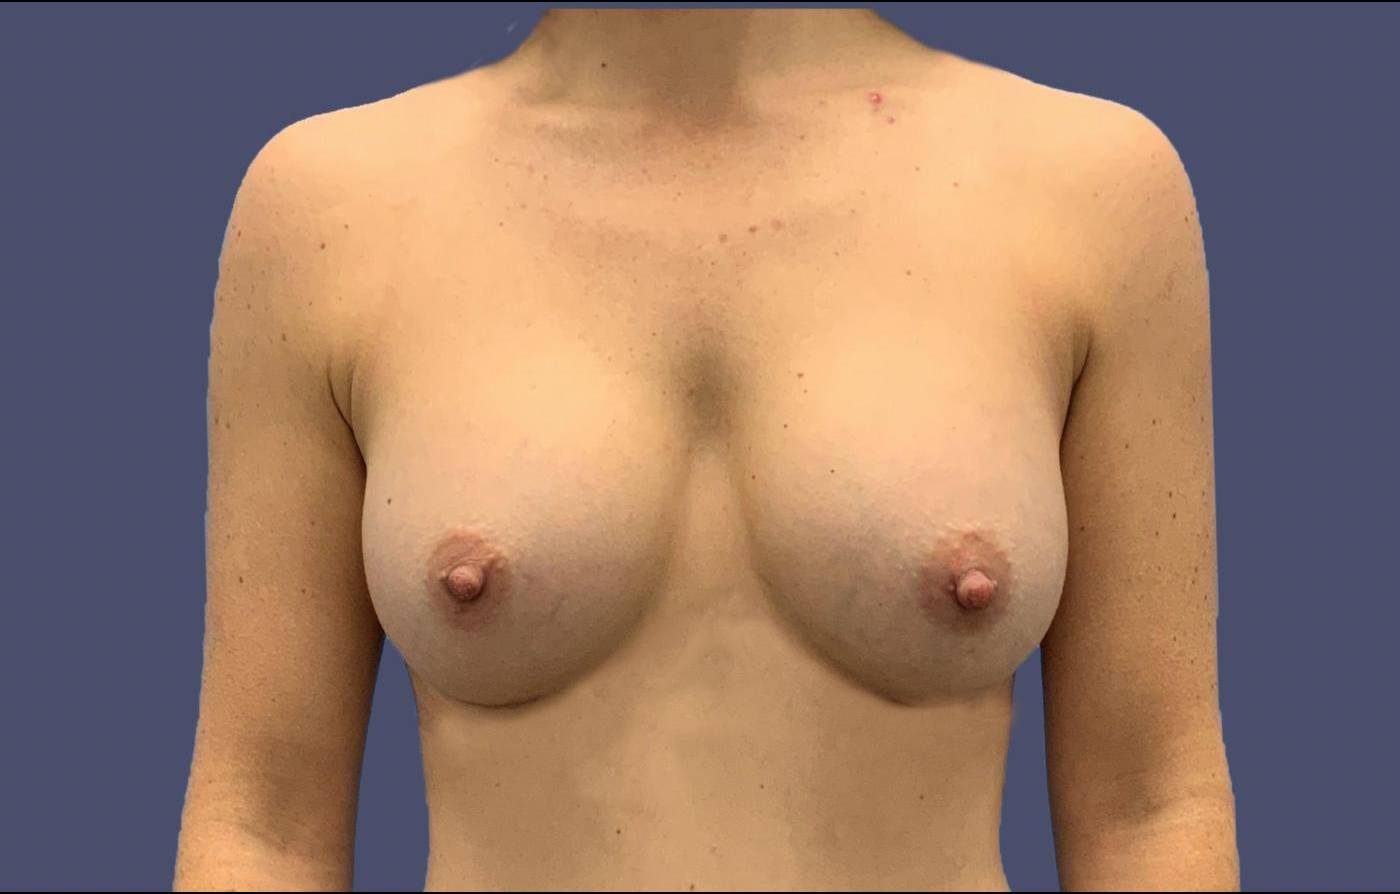 Breast Augmentation 19 After